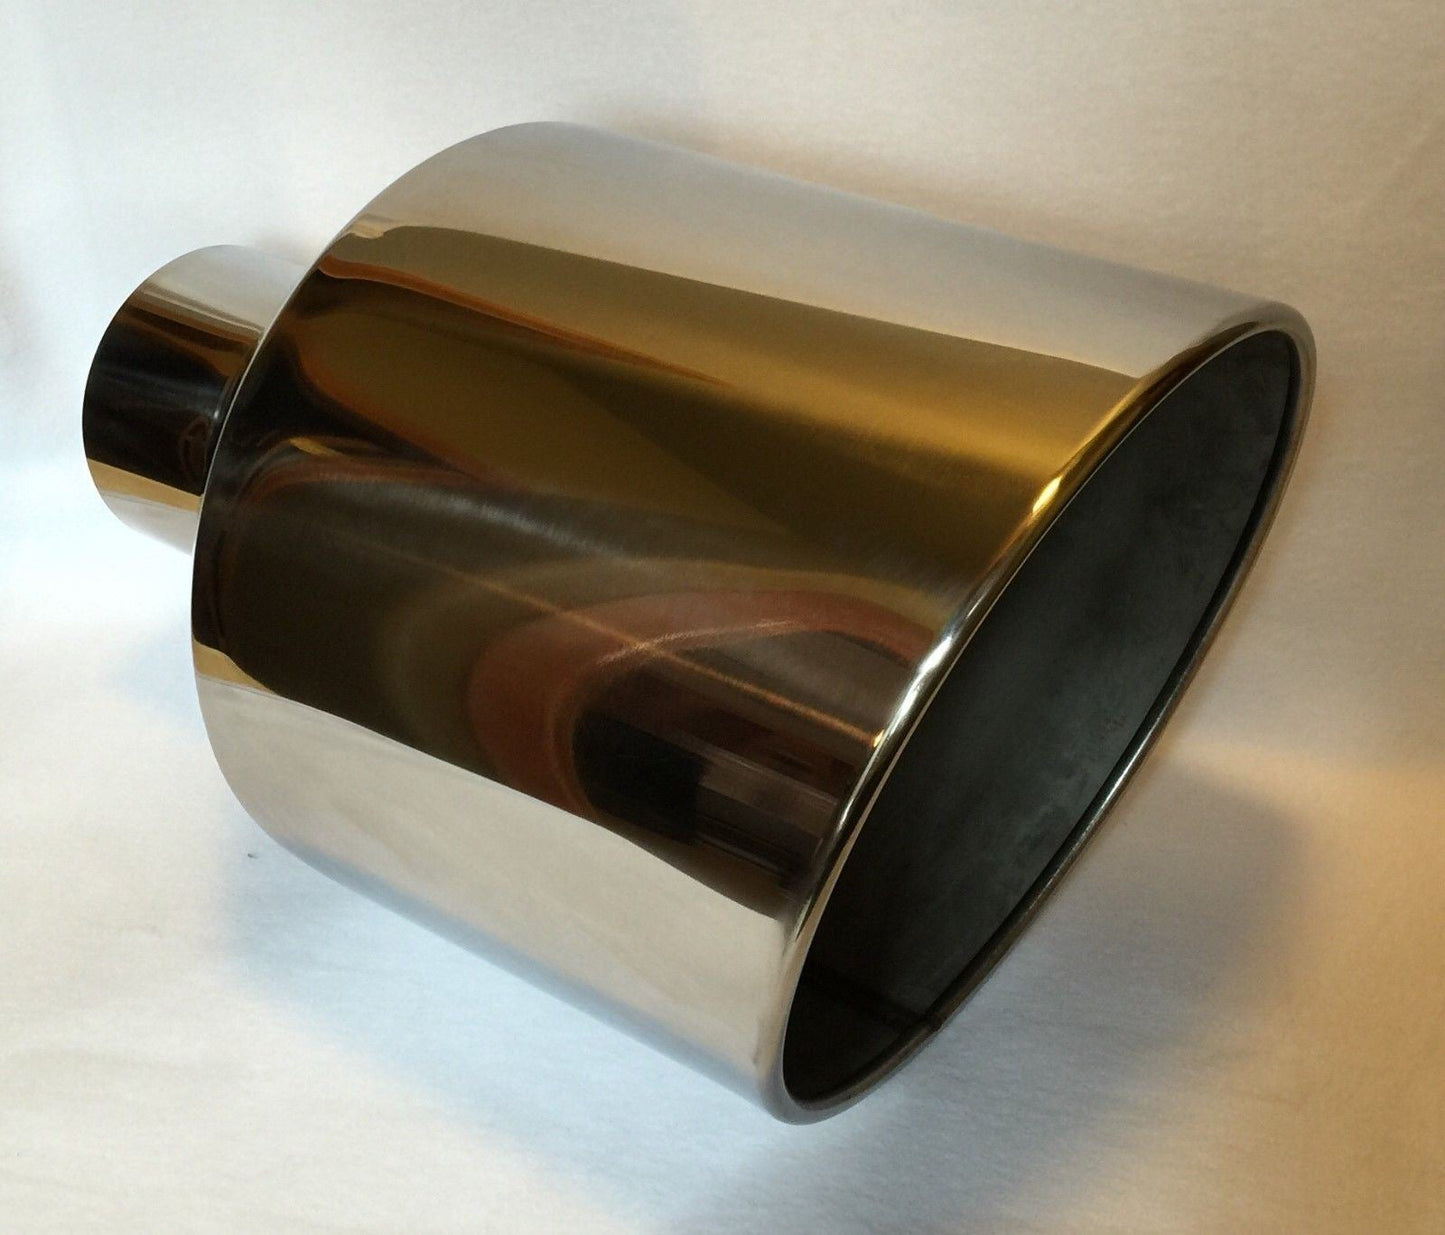 CHEVY DURAMAX 6.6L 5" IN x 12" OUT x 18" LONG POLISHED STAINLESS EXHAUST TIP